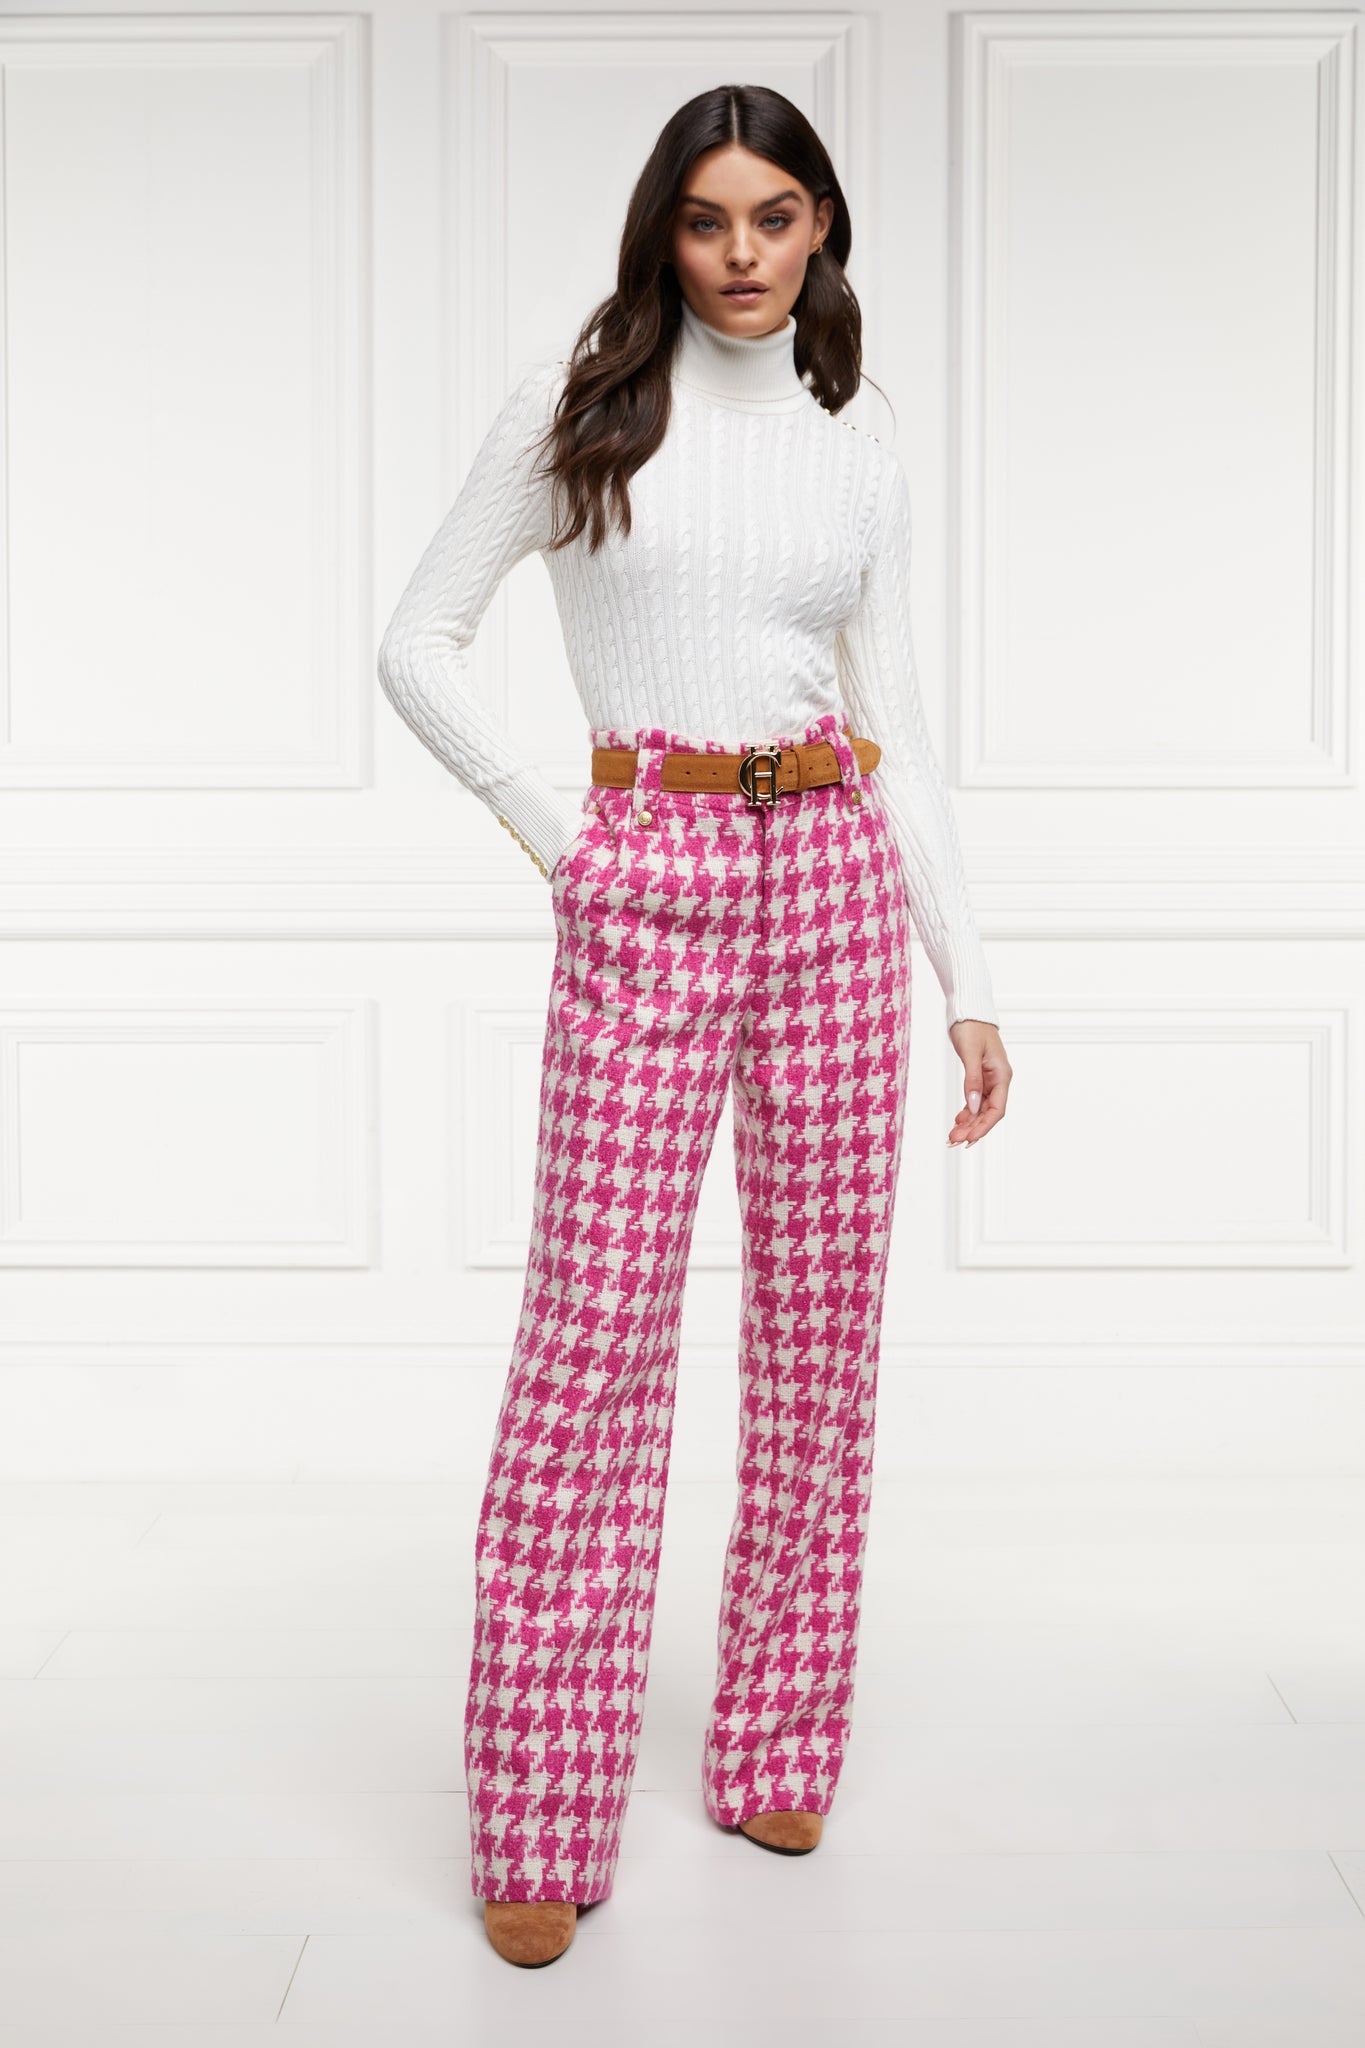 Women's hot pink houndstooth wool high waisted straight trousers with white roll neck cable knit top and tan suede belt